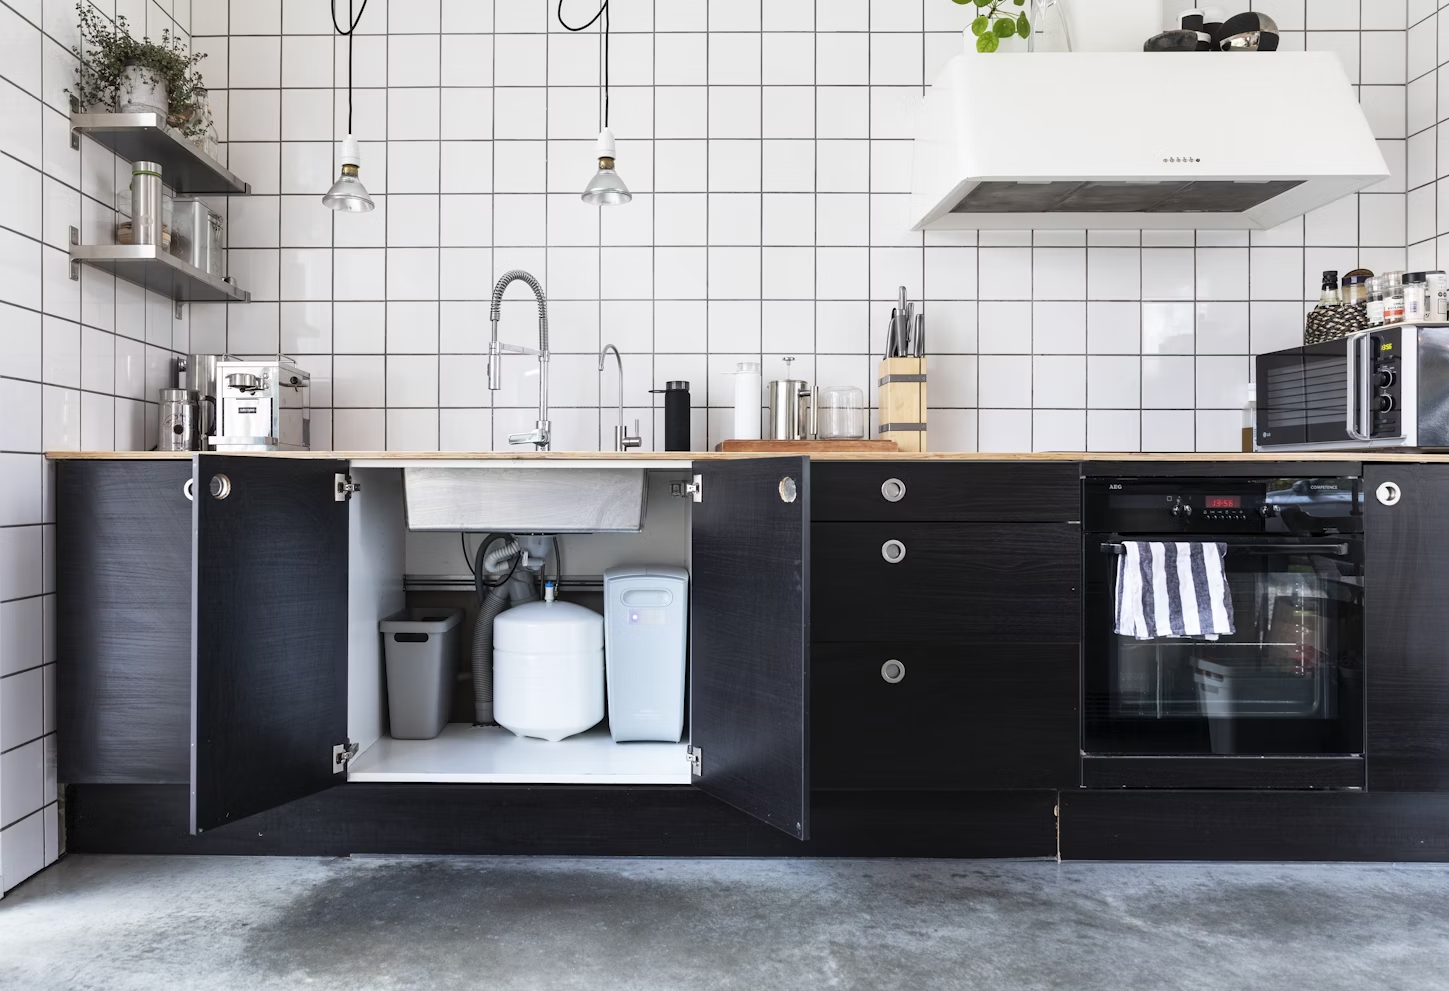 A minimalist clean kitchen with water filter installed